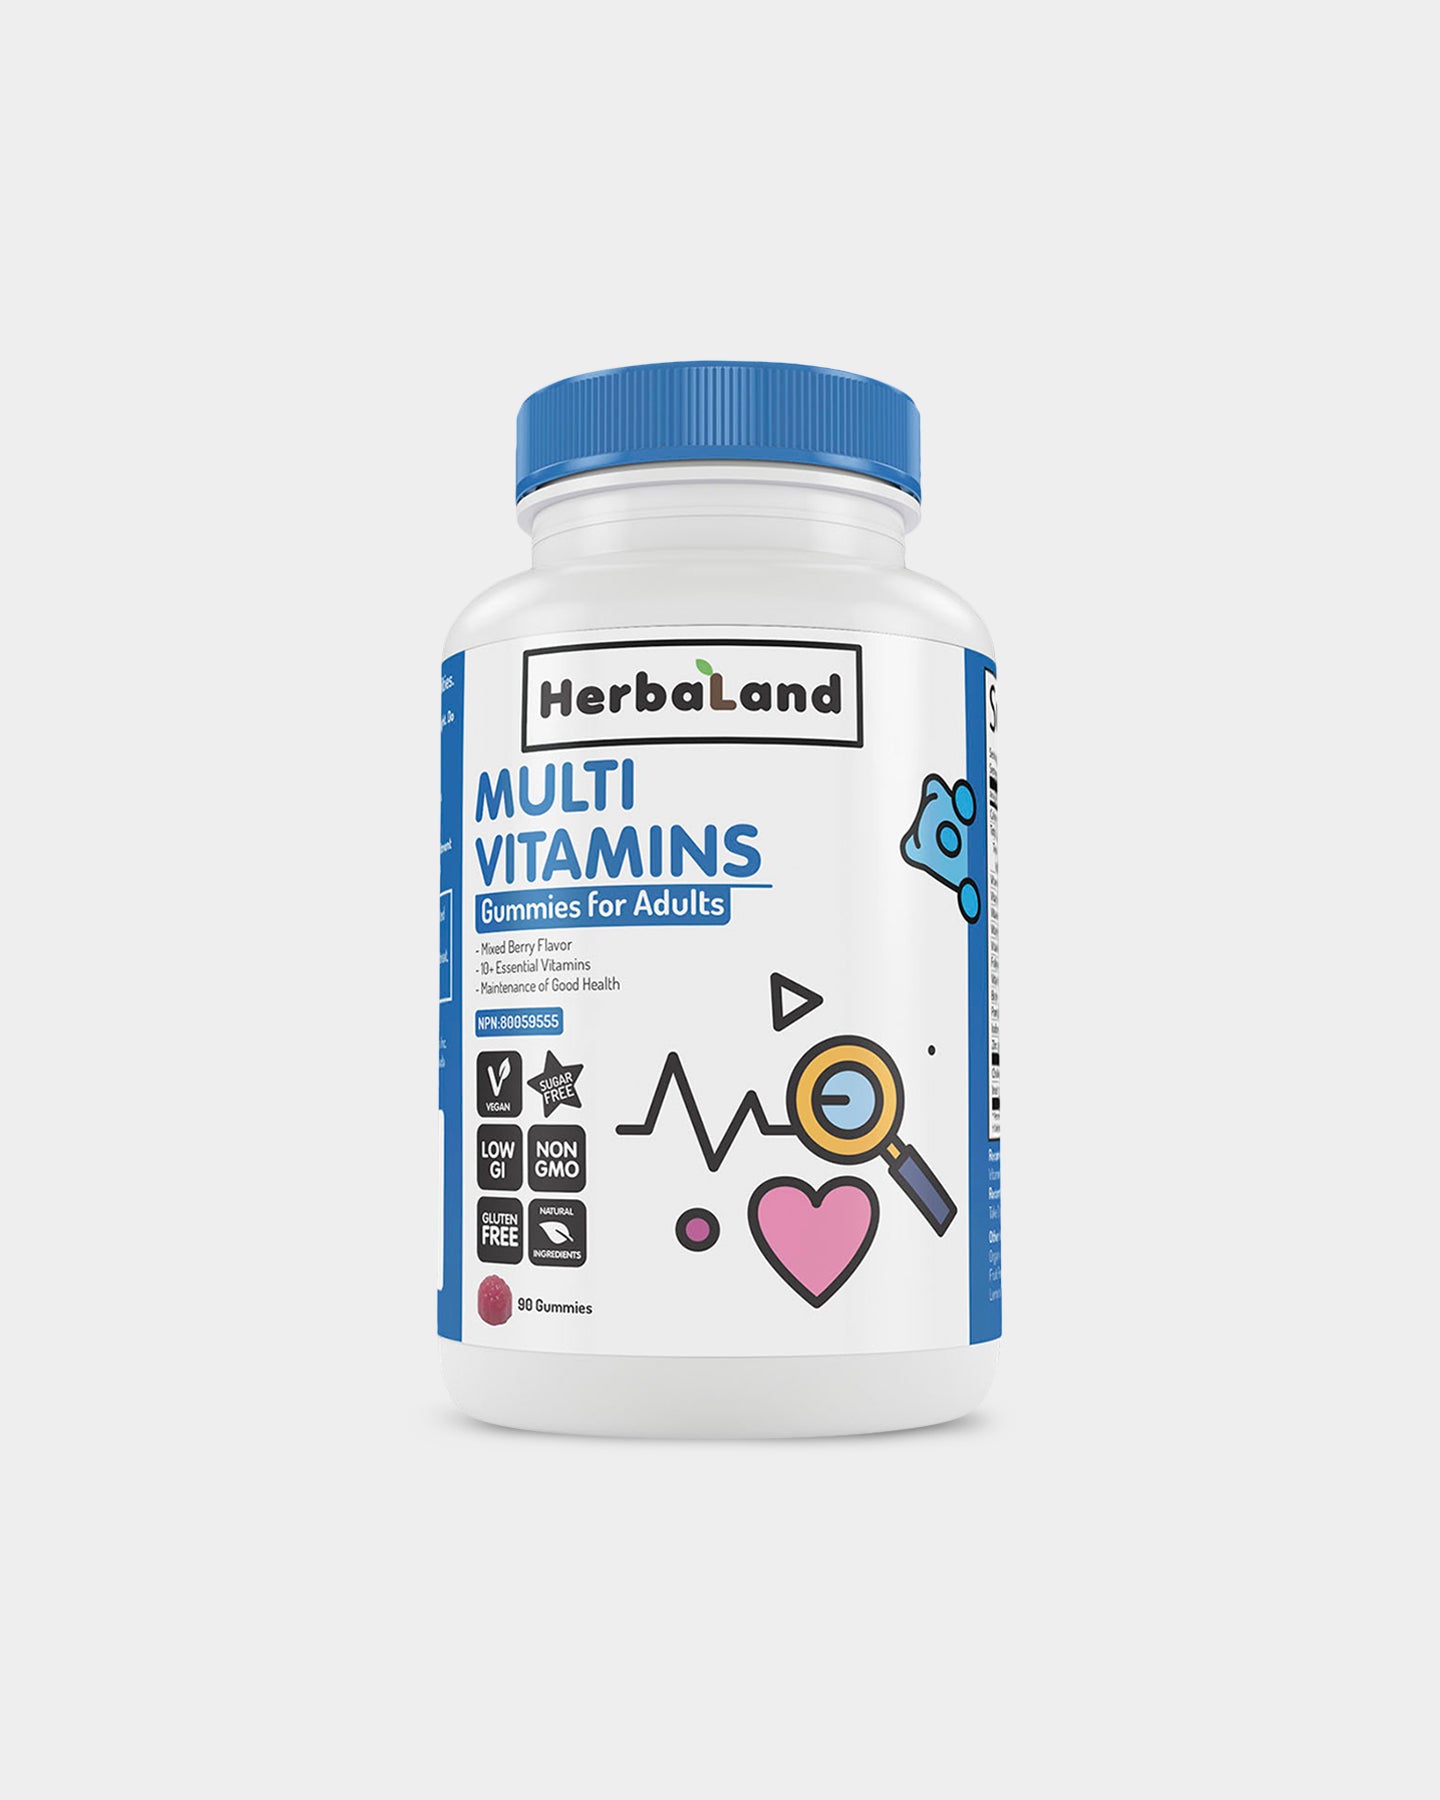 Image of Herbaland Multivitamin Gummies for Adults